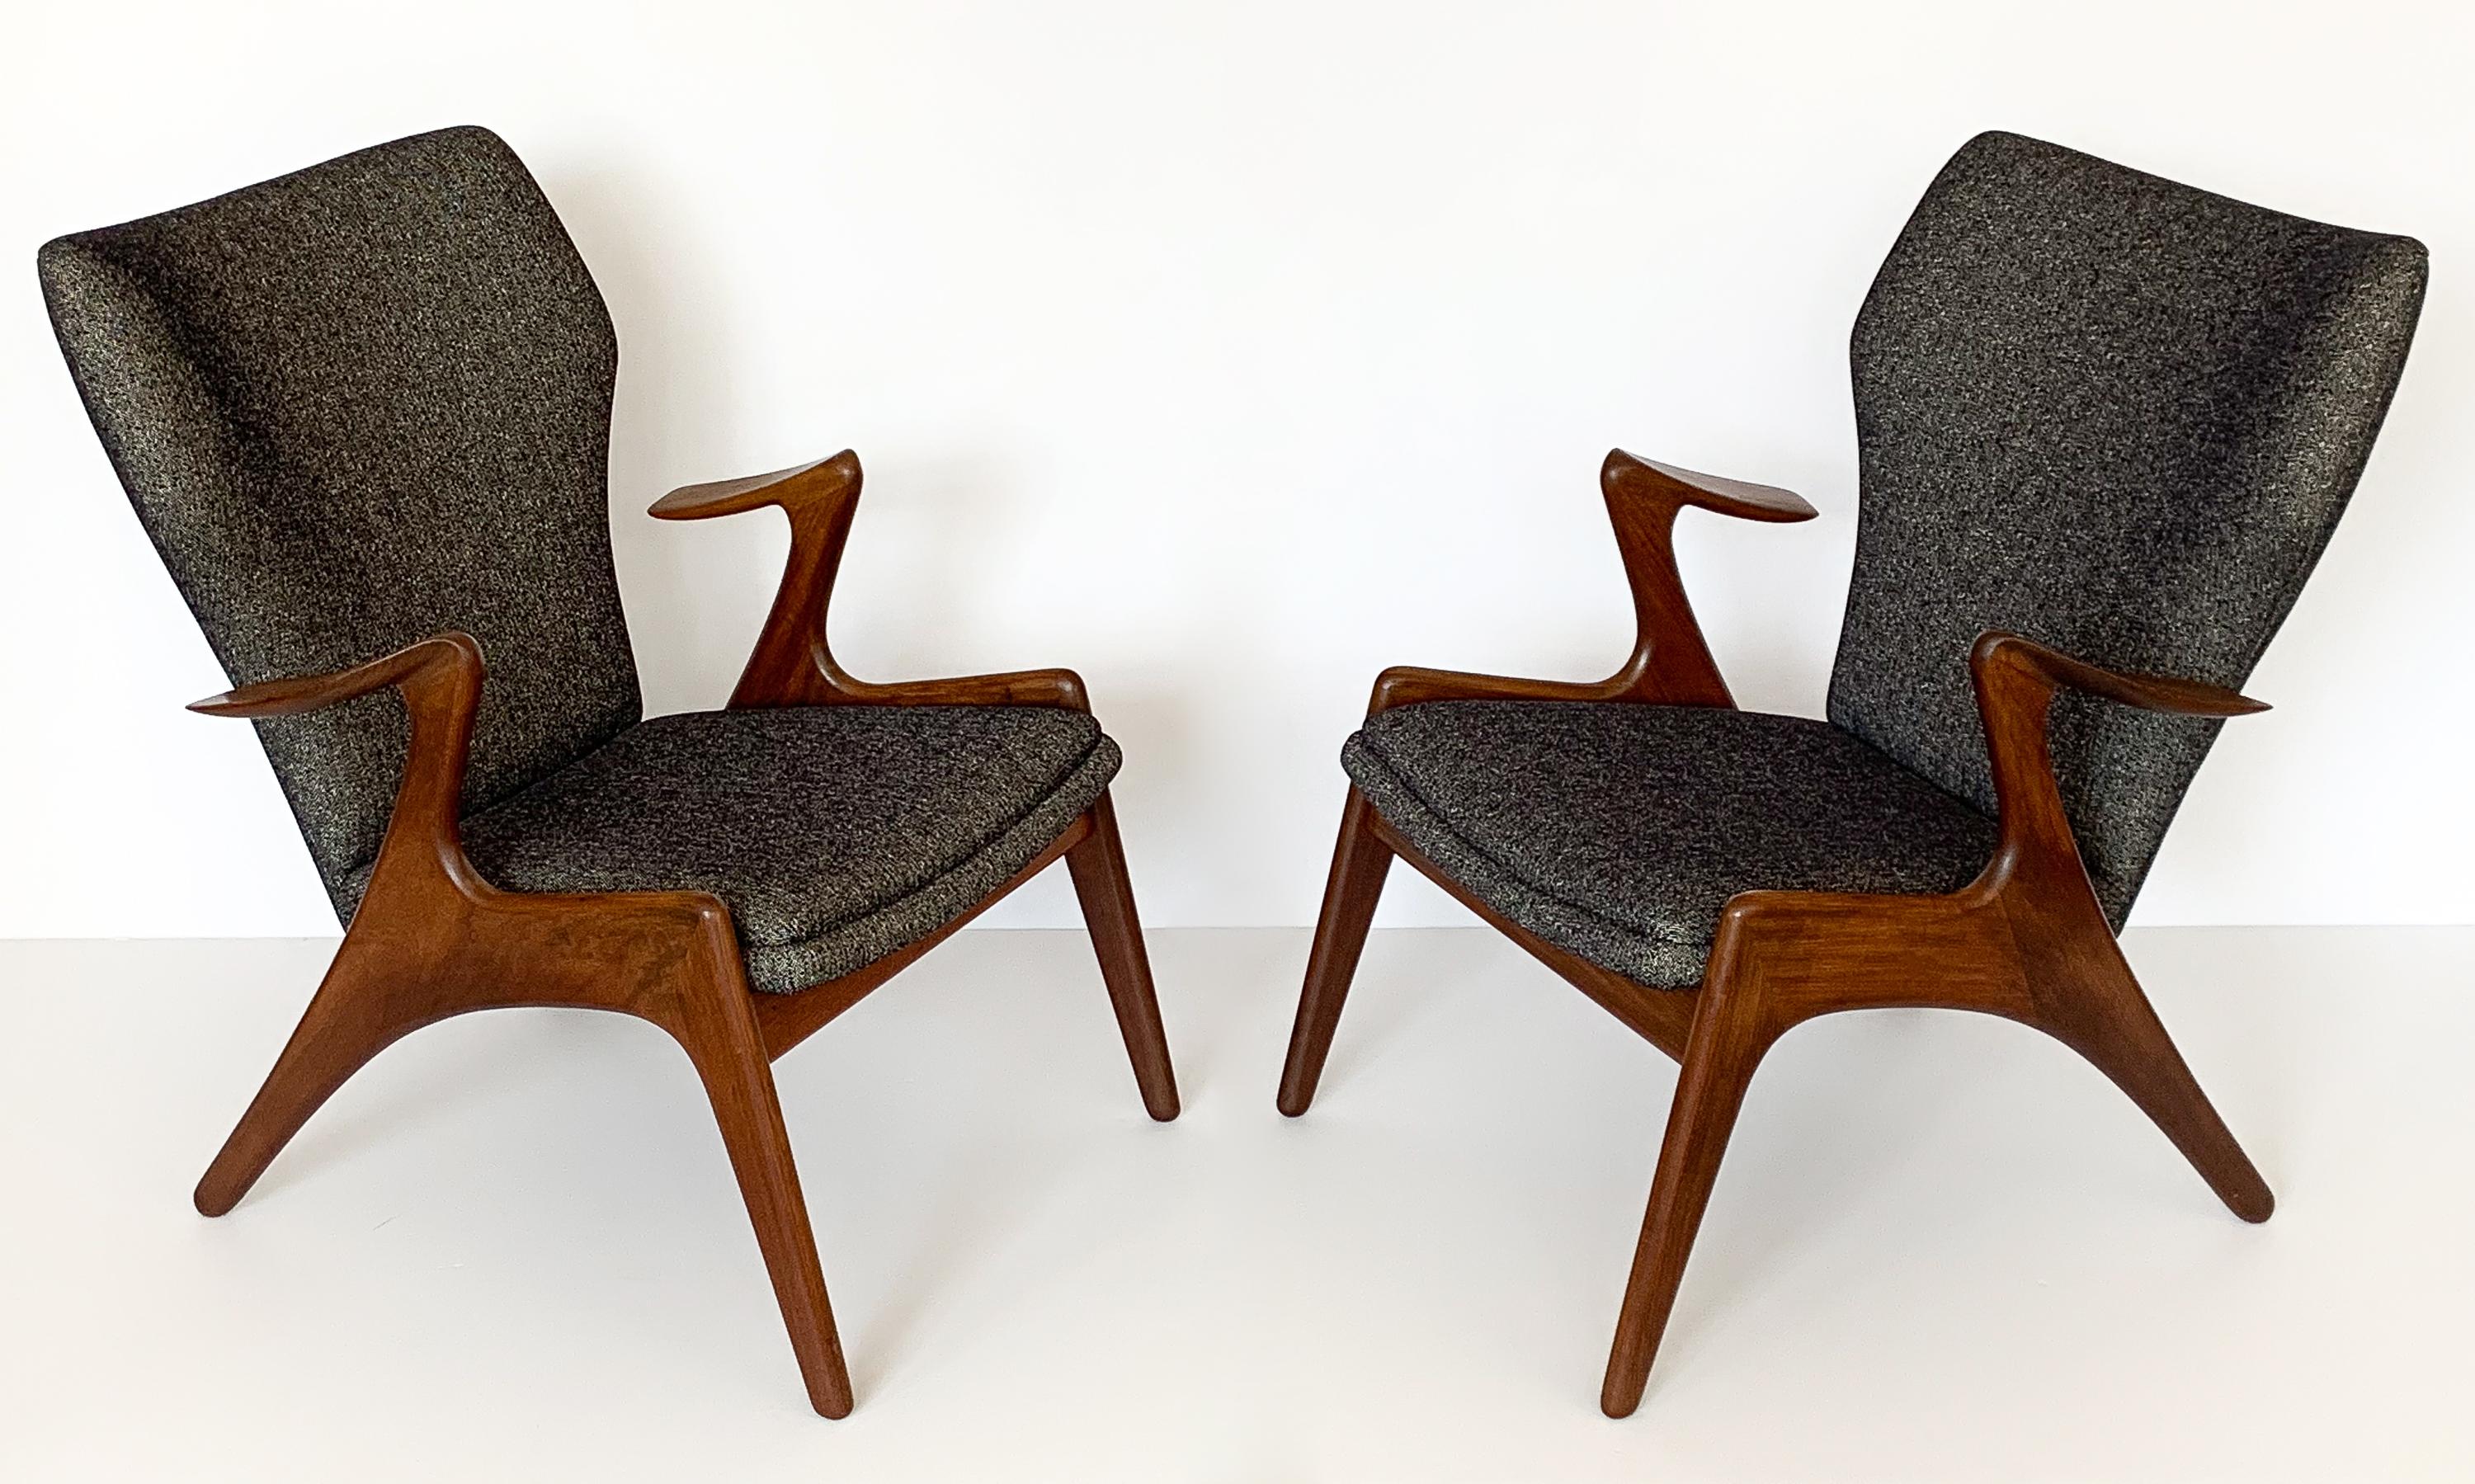 An exceptional pair of Danish sculptural teak lounge chairs by Kurt Ostervig, circa 1960s. Solid teak construction with angled back legs and sculpted leaf shaped floating armrests. Teak has a darker color almost resembling walnut. Newly upholstered